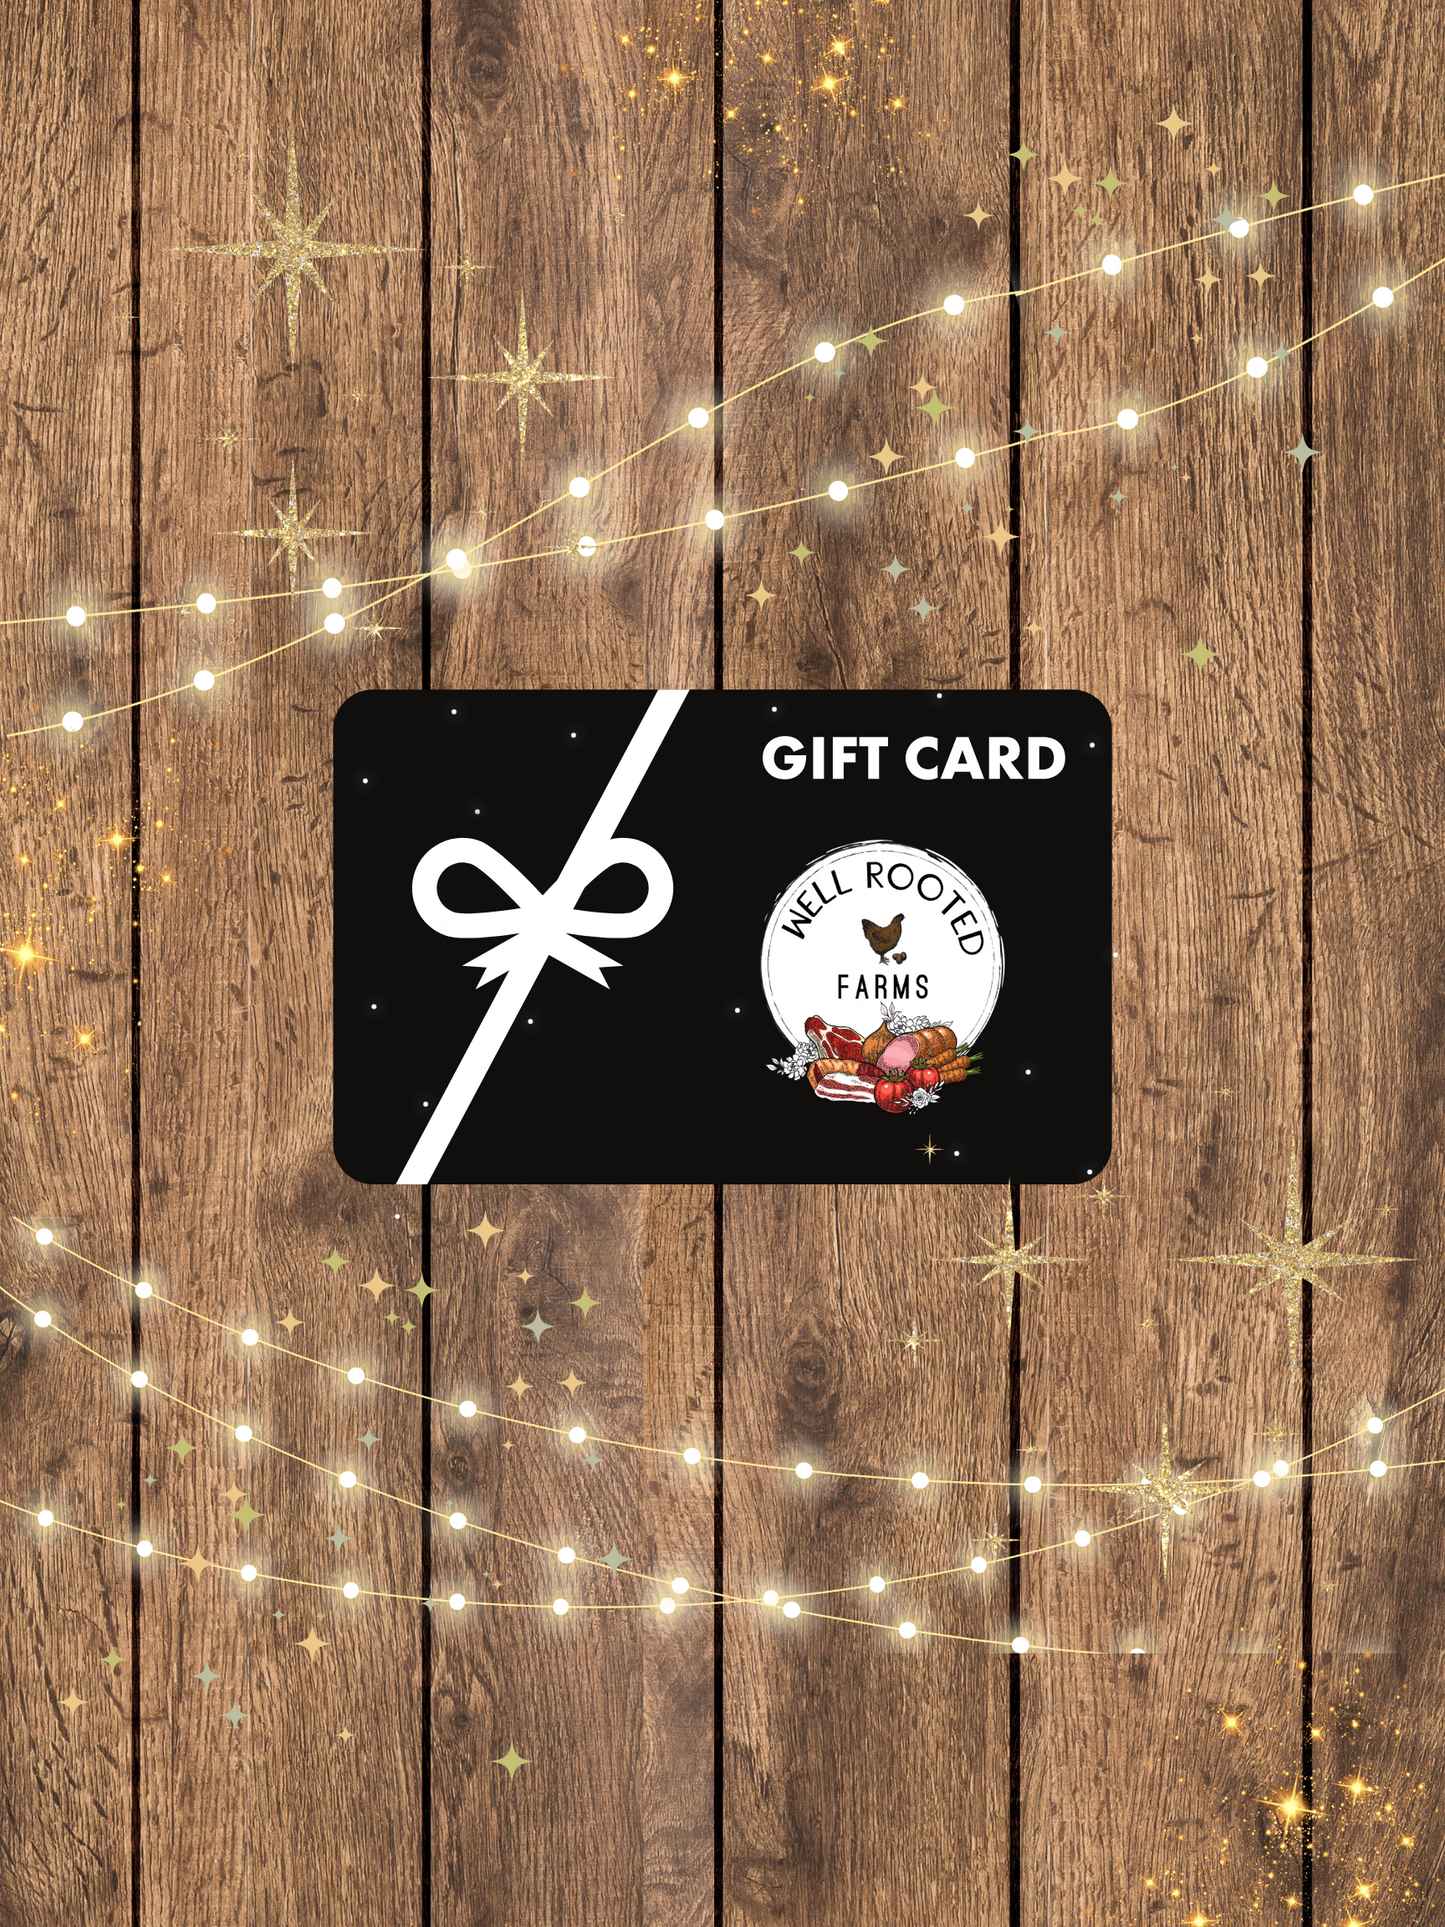 Well Rooted Farms Gift Card